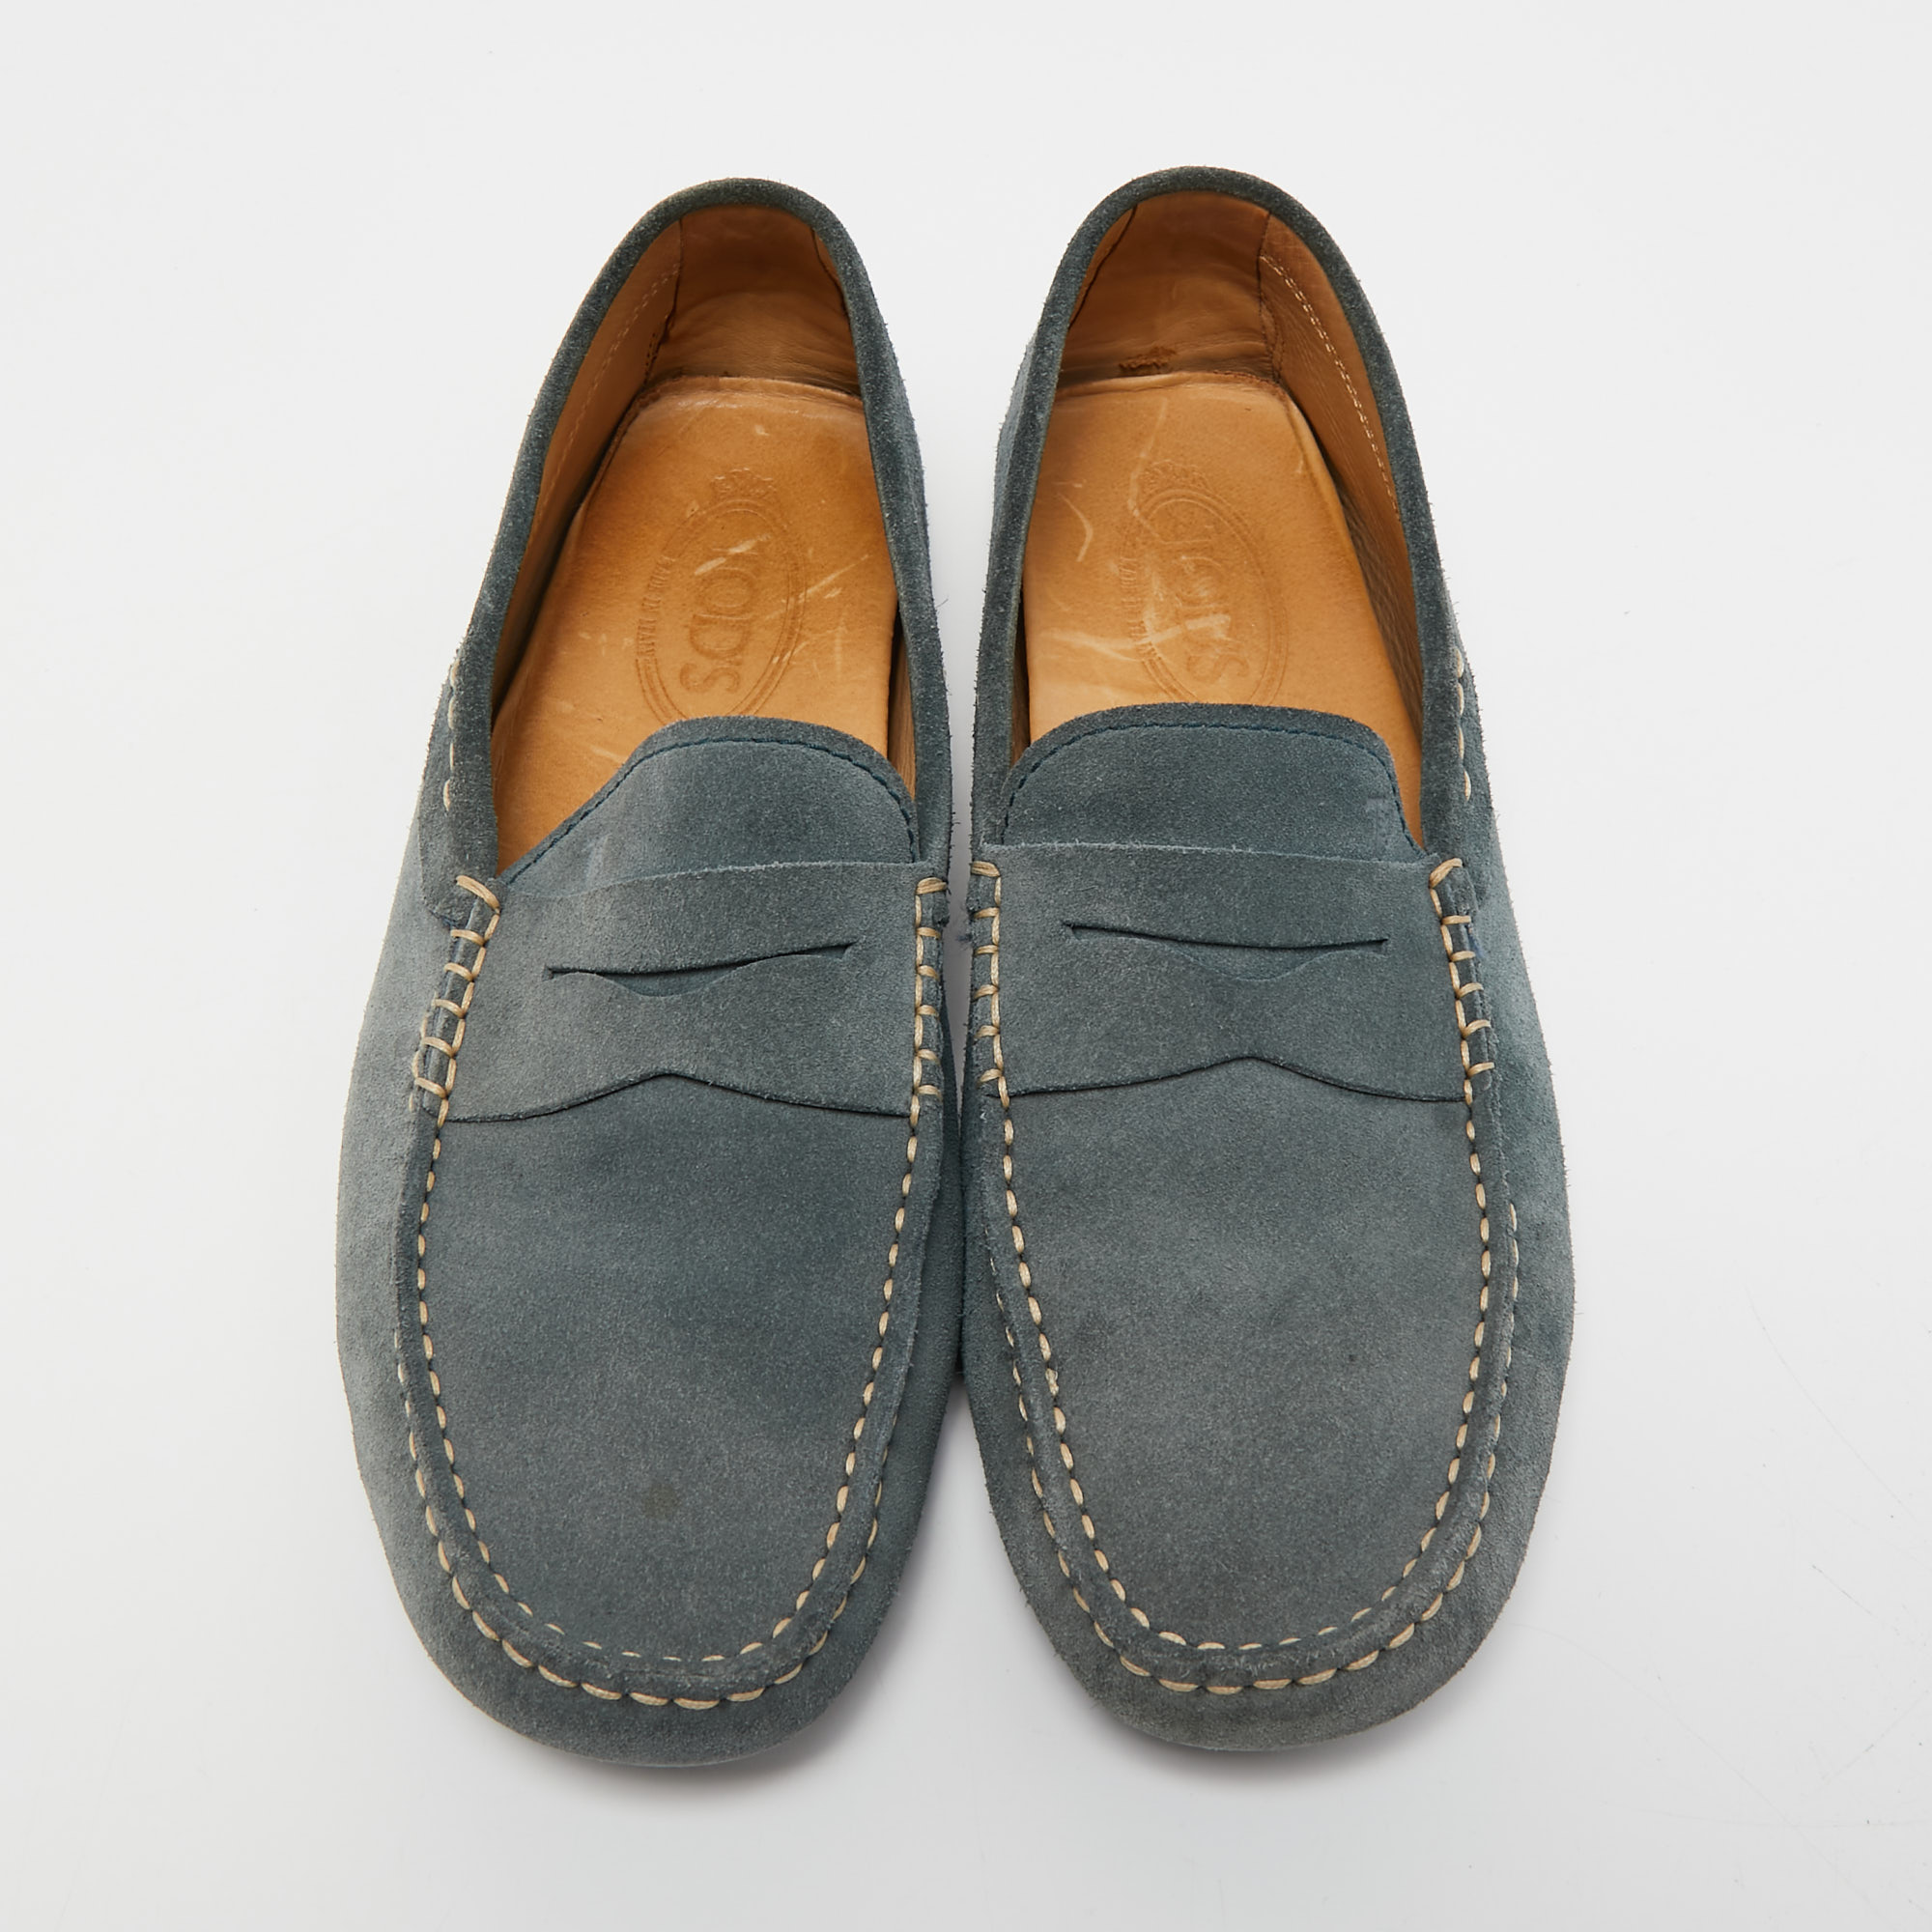 Tods Grey Suede Gommini Slip On Loafers Size 42